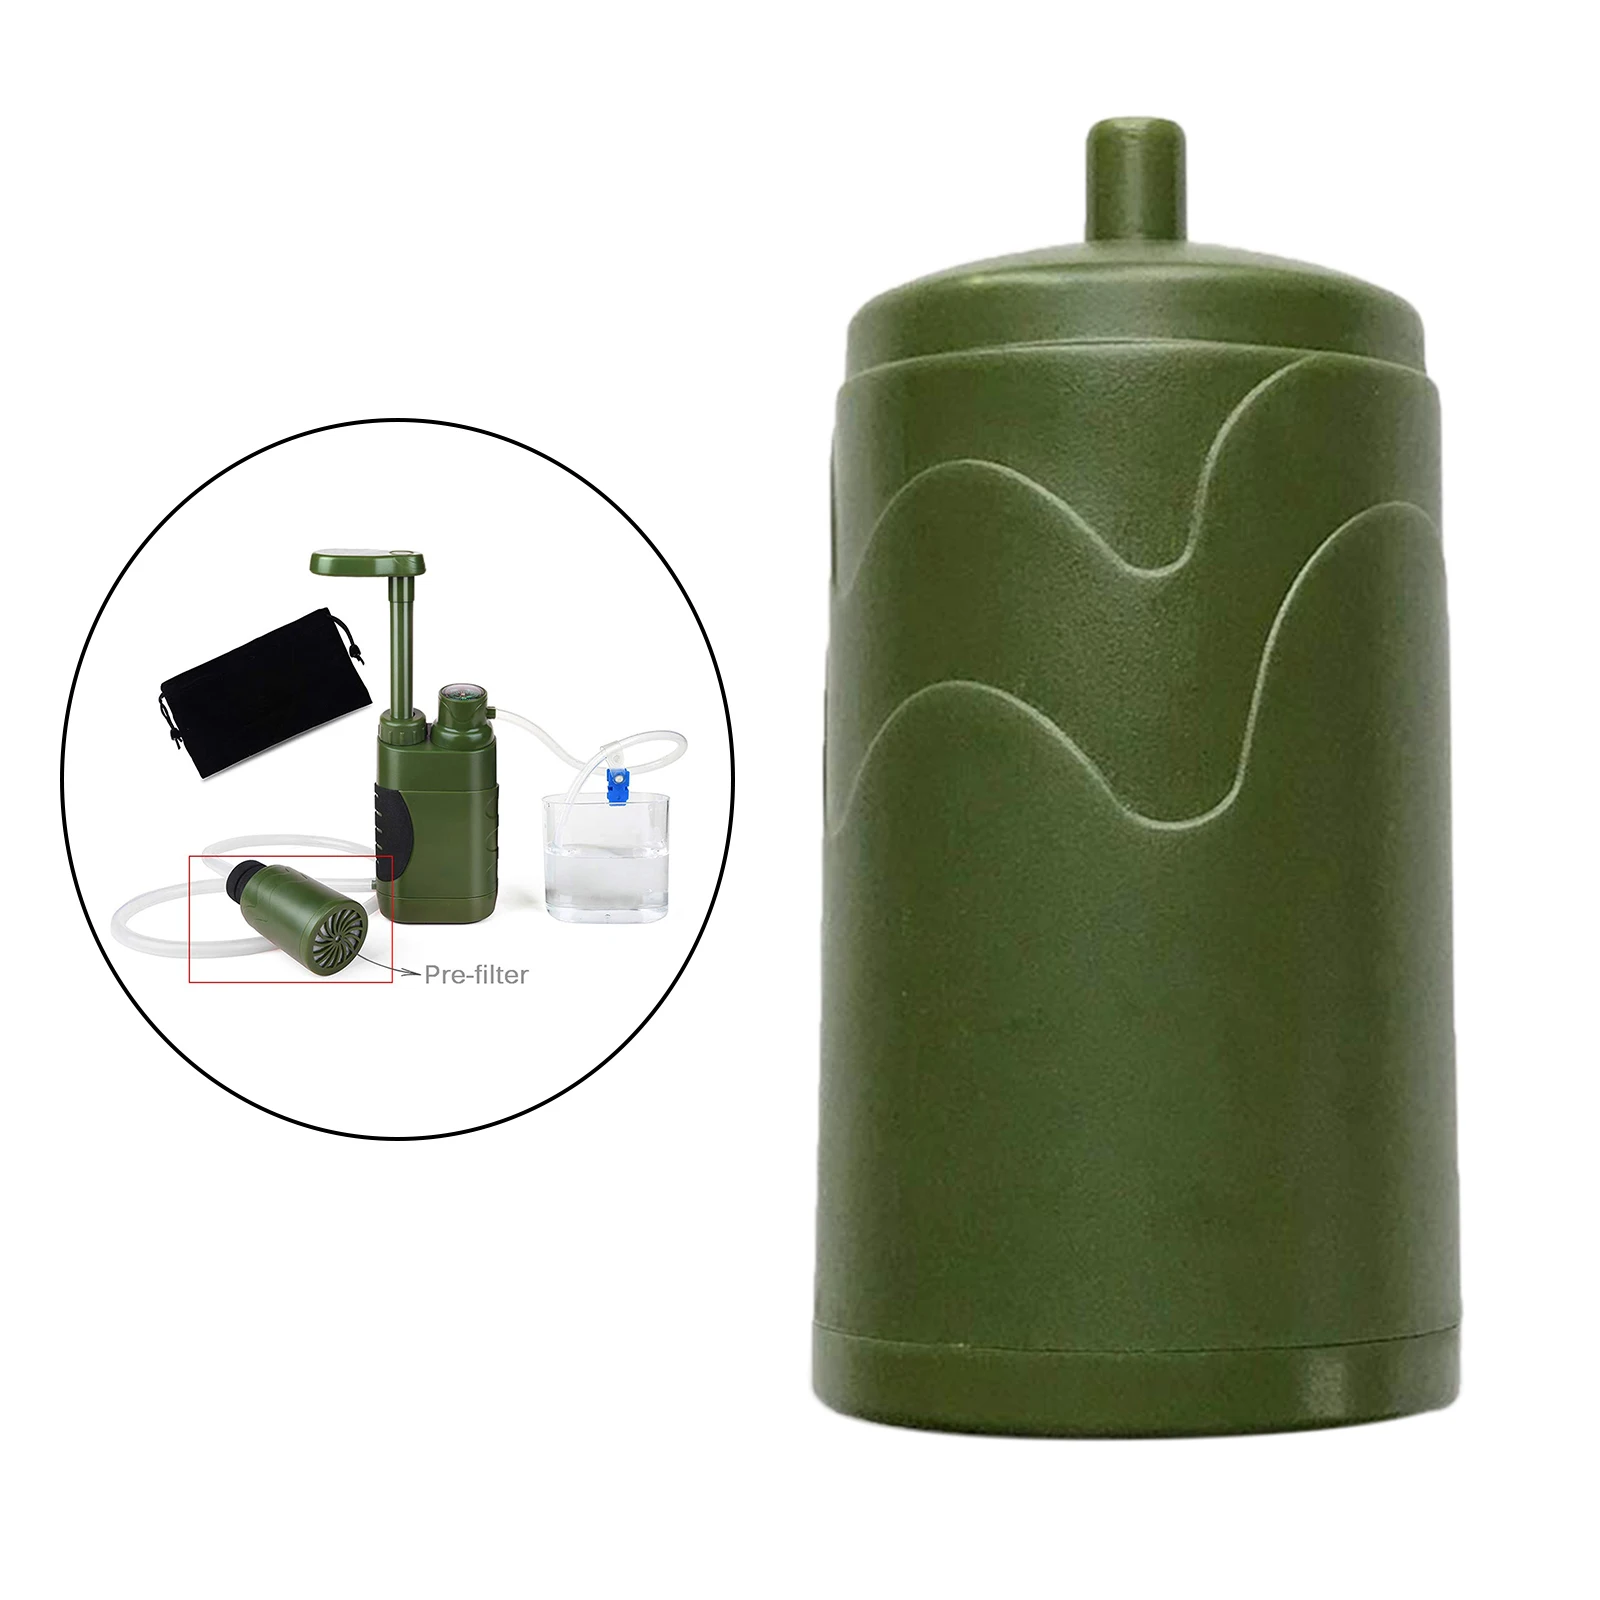 Replaceable Pre-Filter Filter for Outdoor Survival Water Purifier Filtration